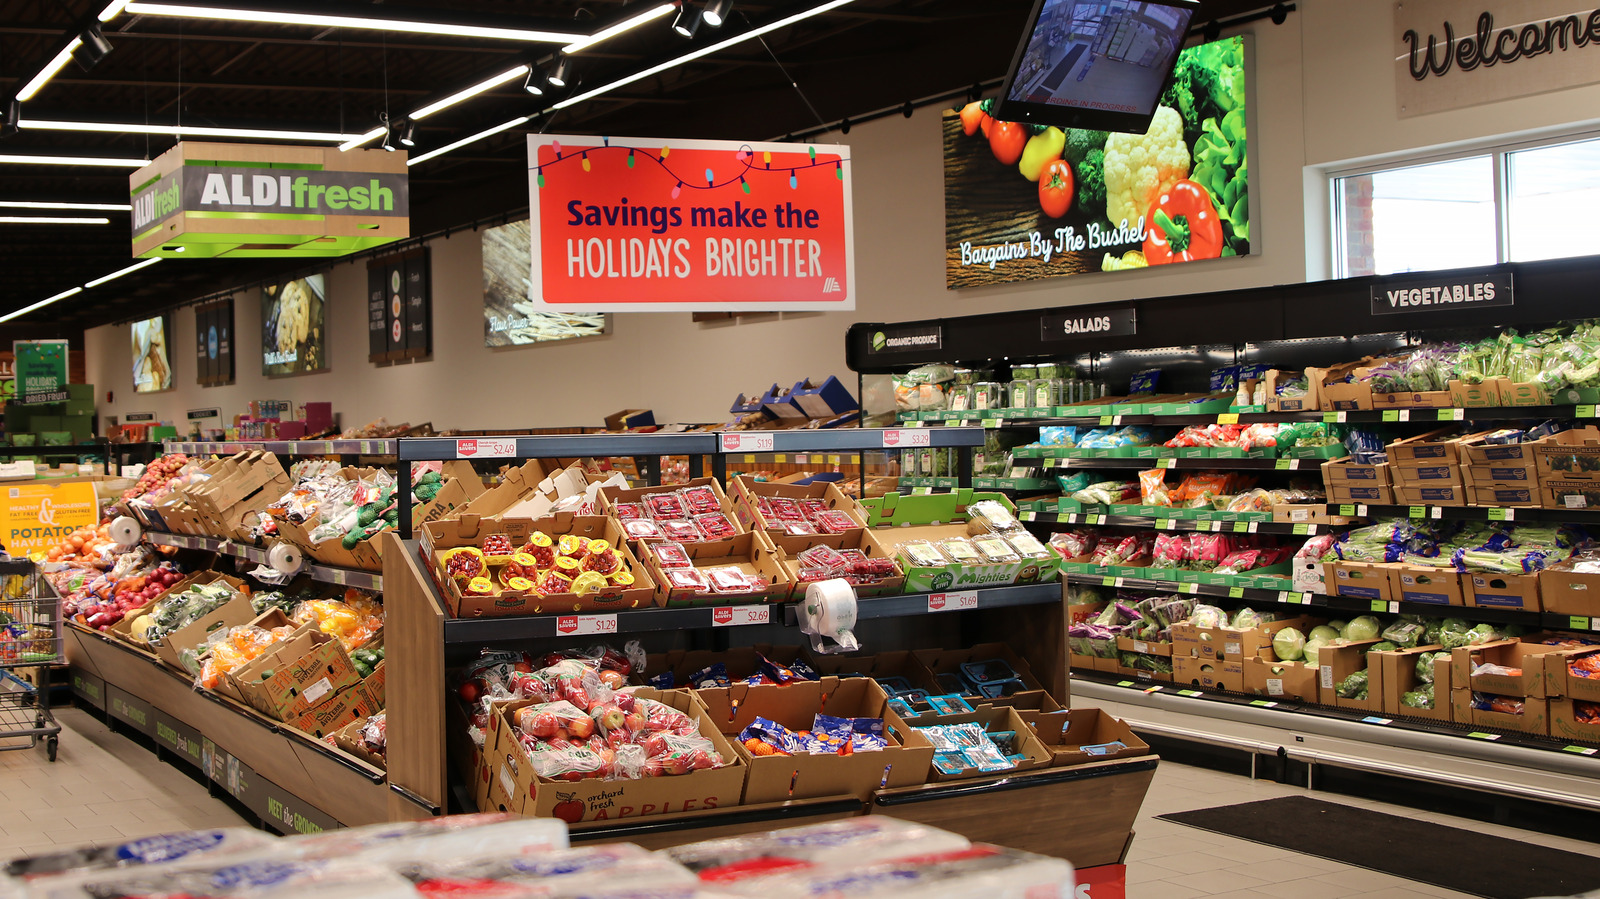 https://www.thedailymeal.com/img/gallery/why-aldi-should-always-be-your-first-stop-for-fresh-fruit/l-intro-1672772436.jpg